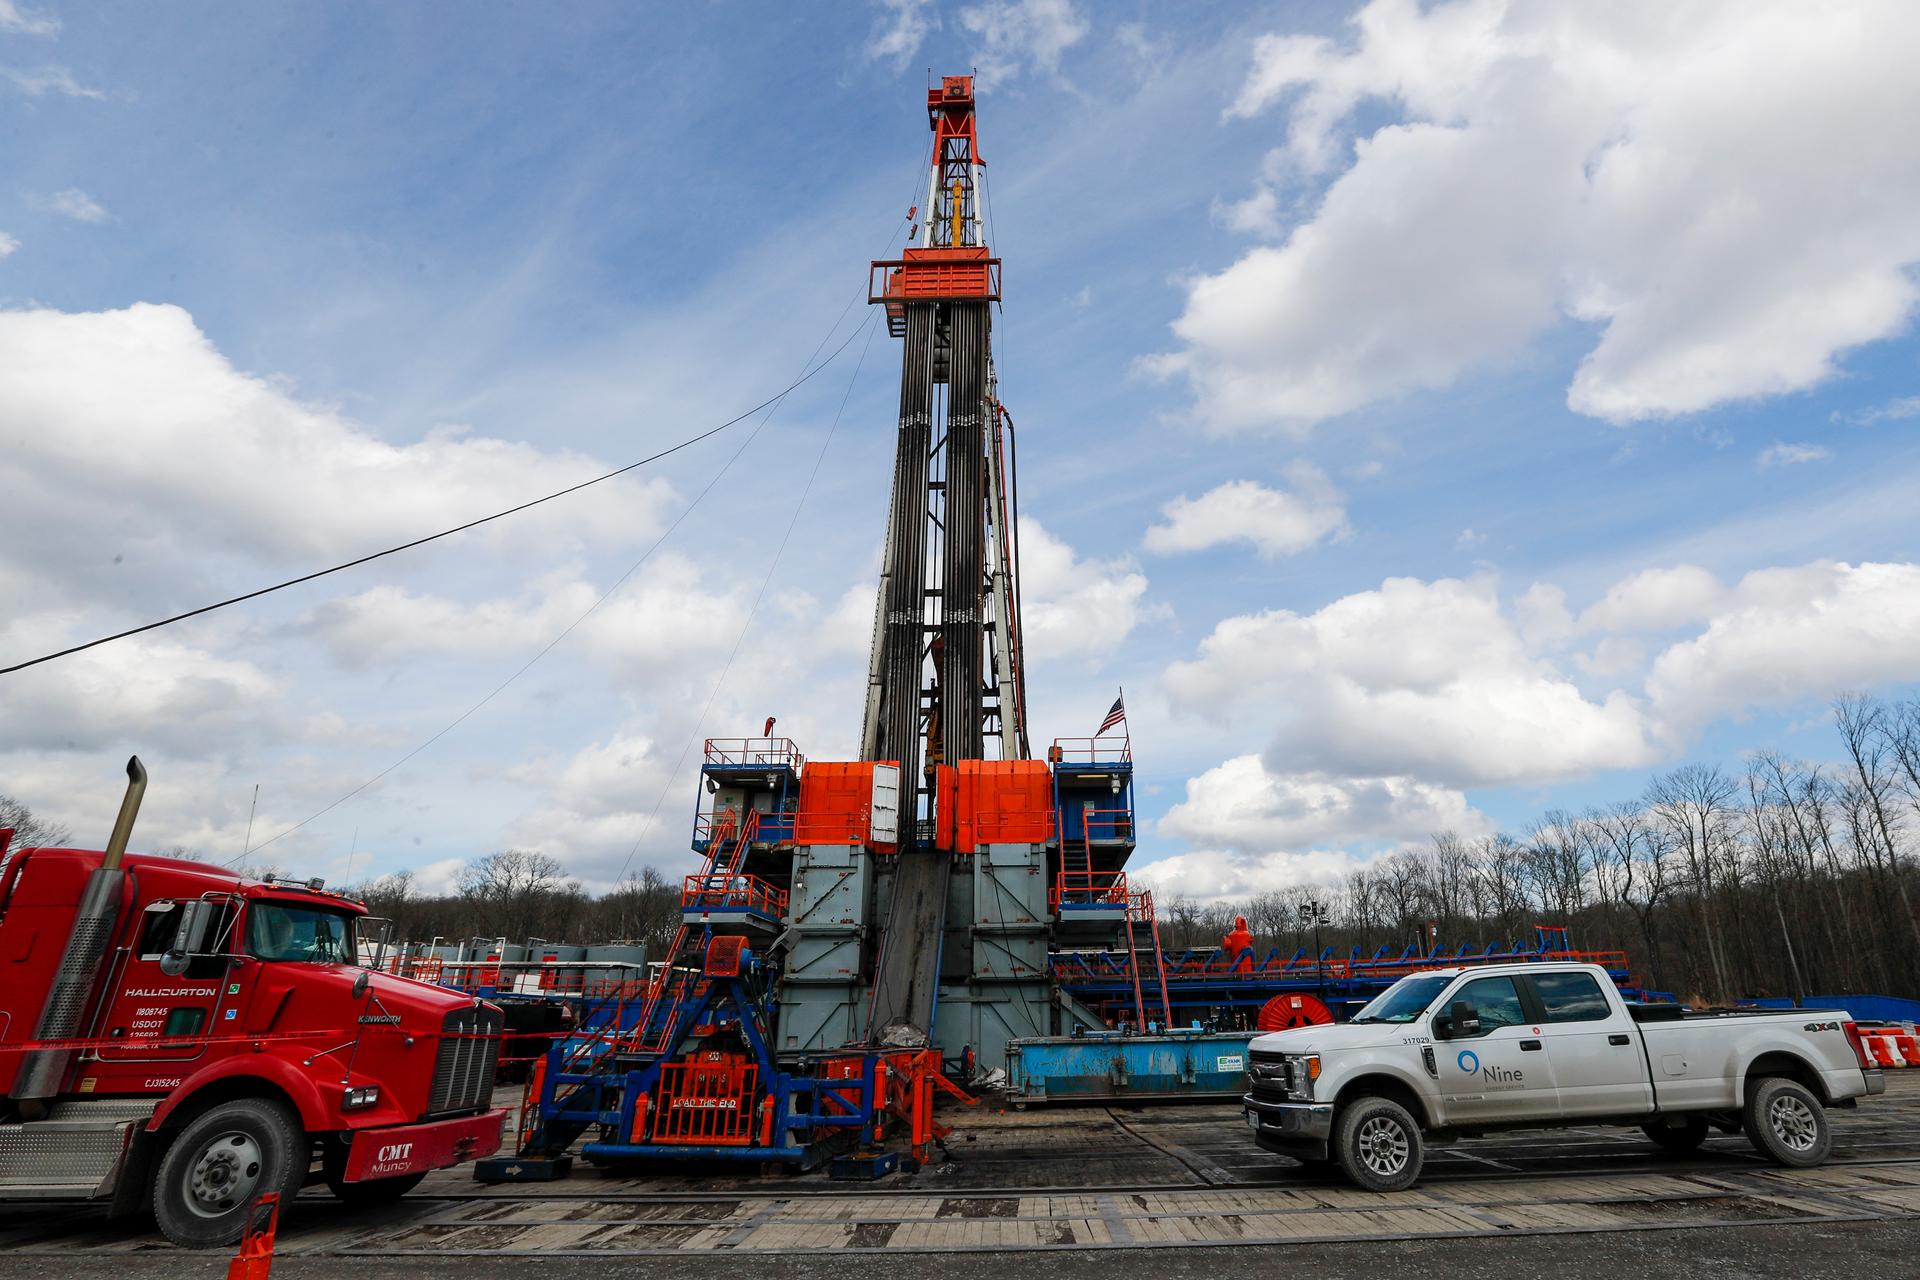 Red and white trucks flank a tall drilling well pictured against the sky